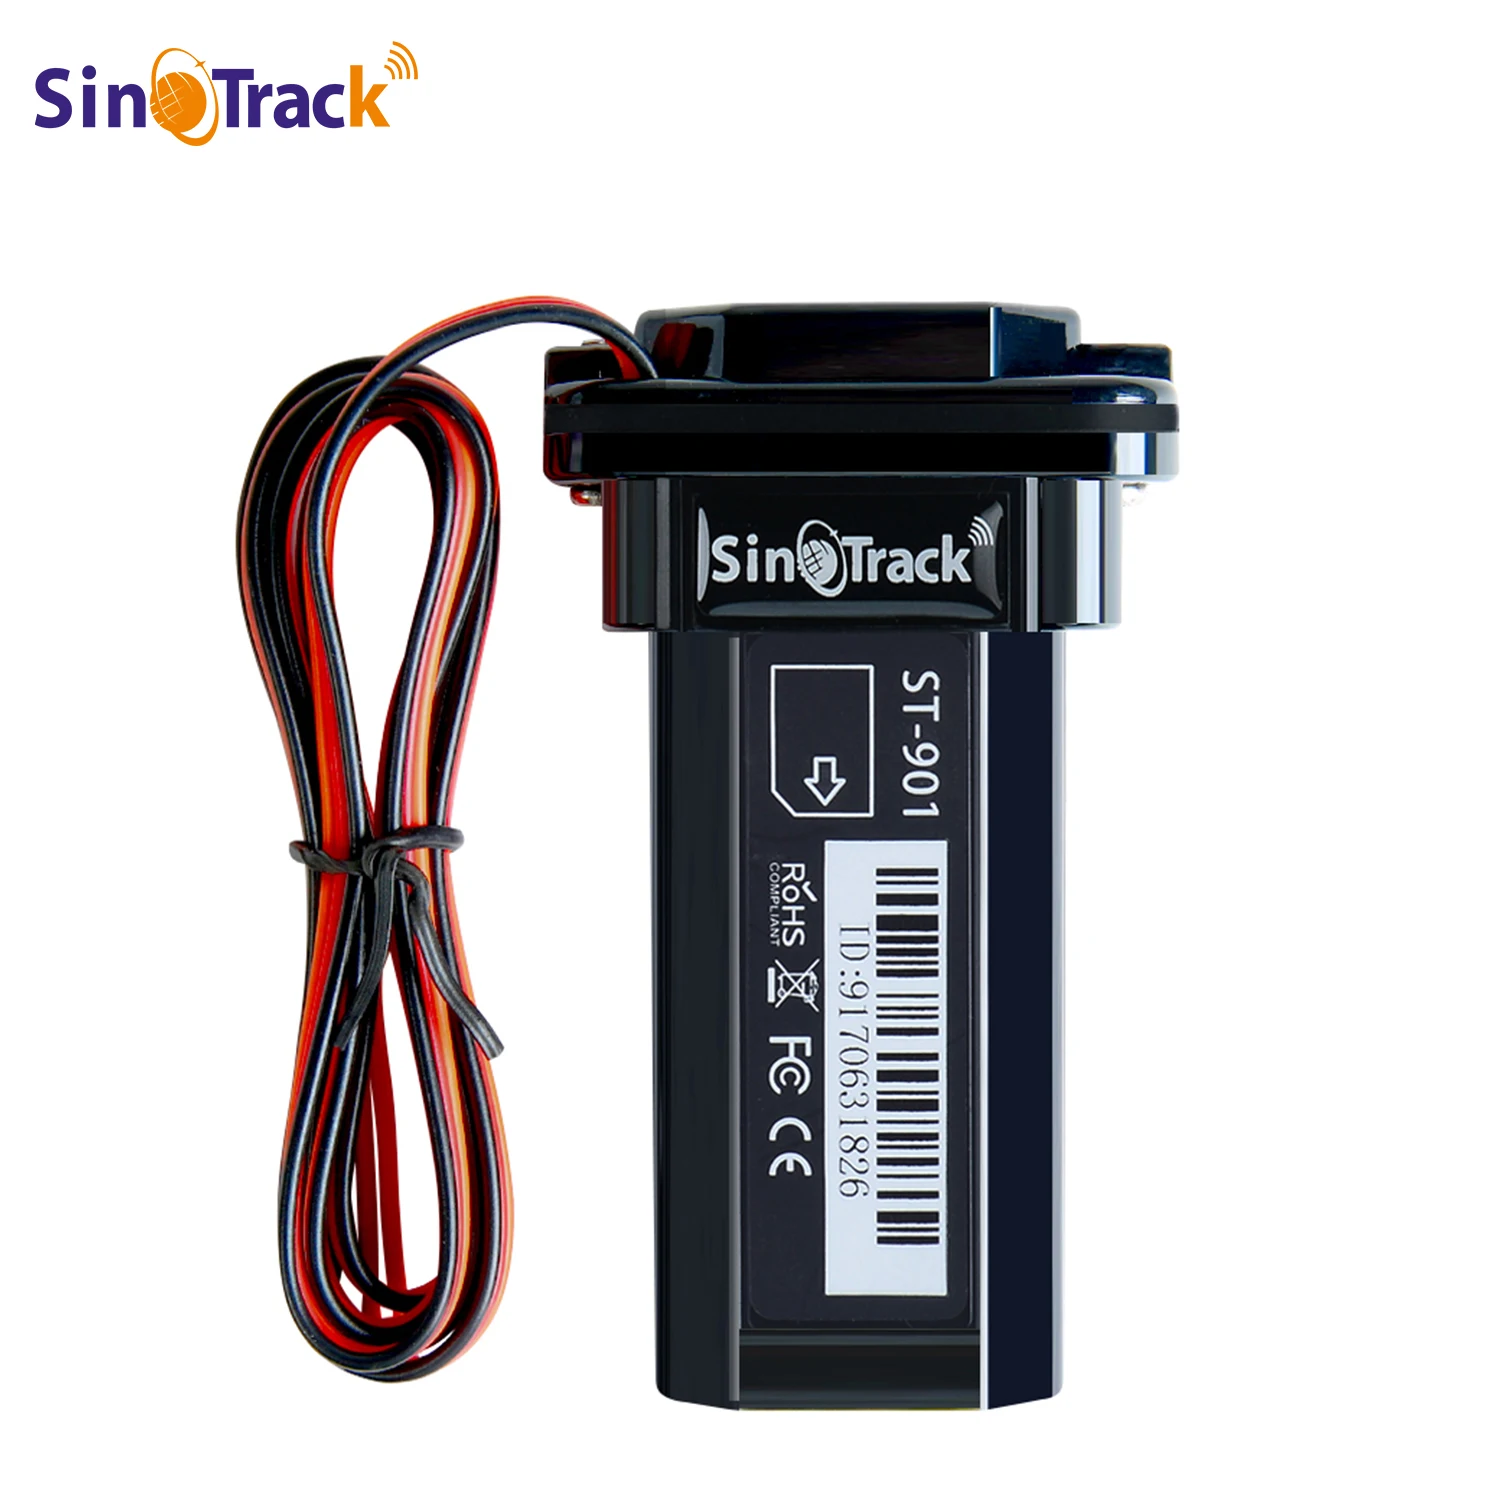 SinoTrack GPS Tracker ST-901 Vehicle Tracking Device Waterproof motorcycle Car - £22.99 GBP+